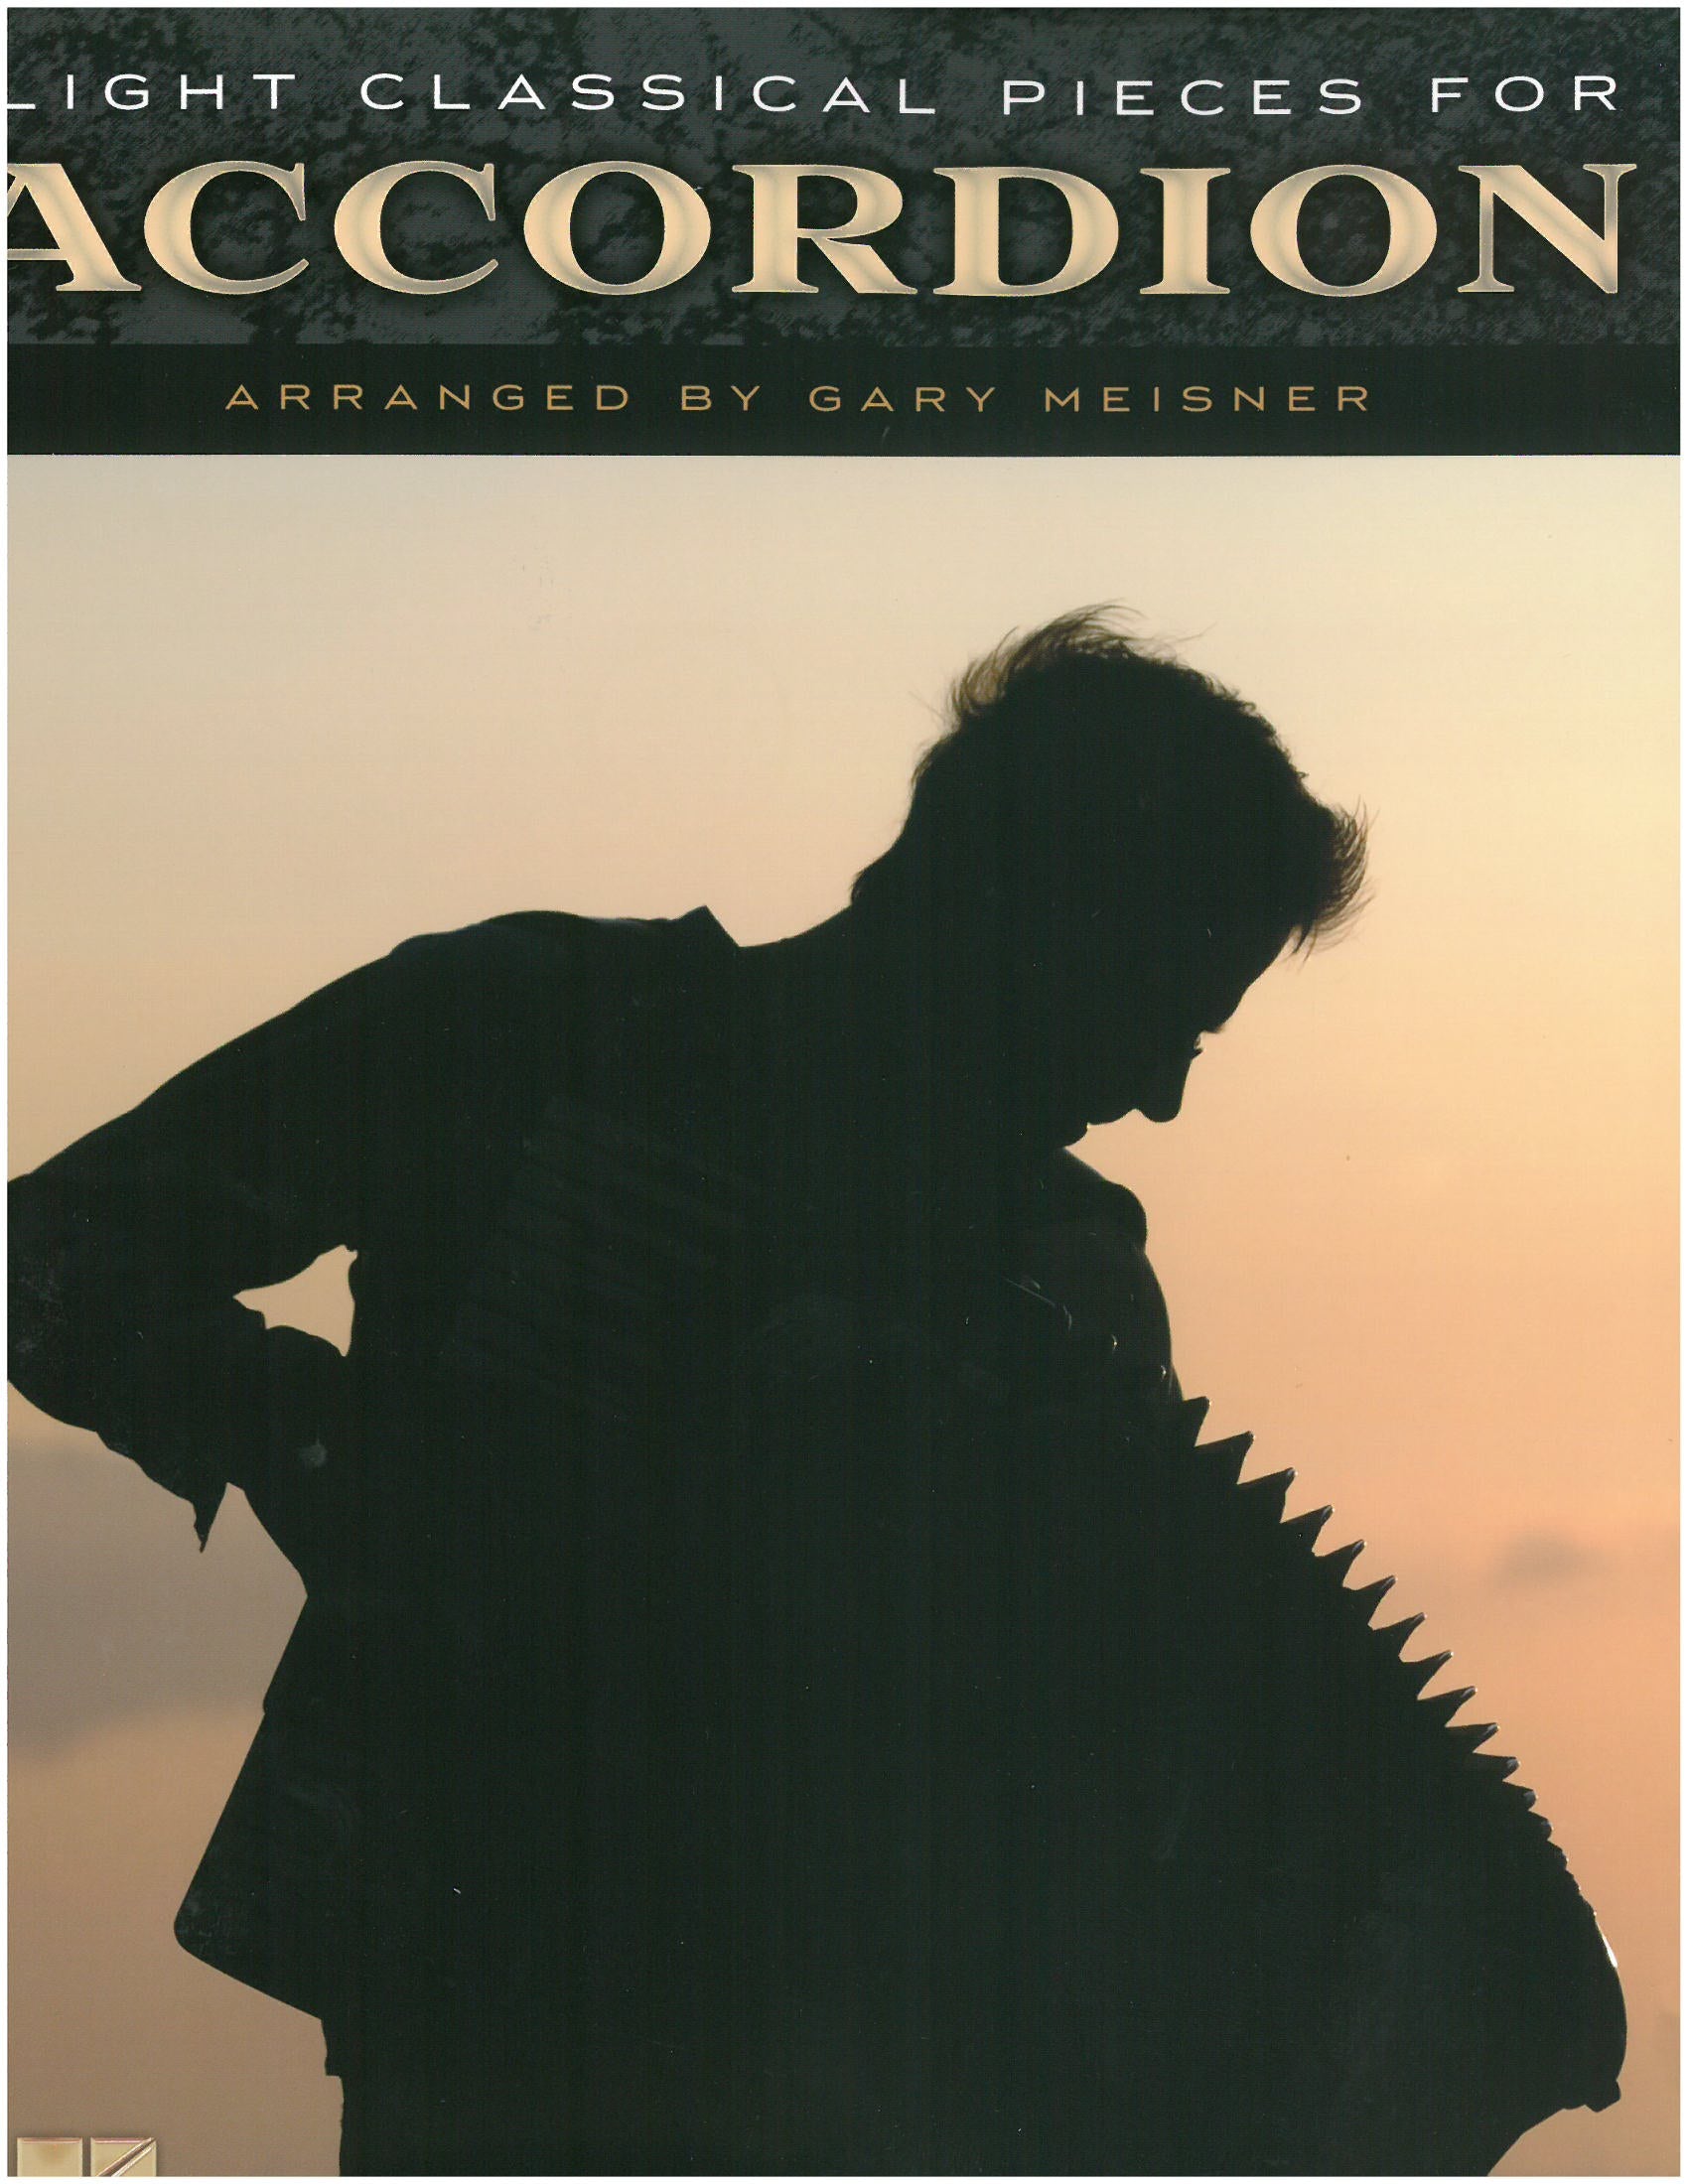 Light Classical Pieces For Accordion